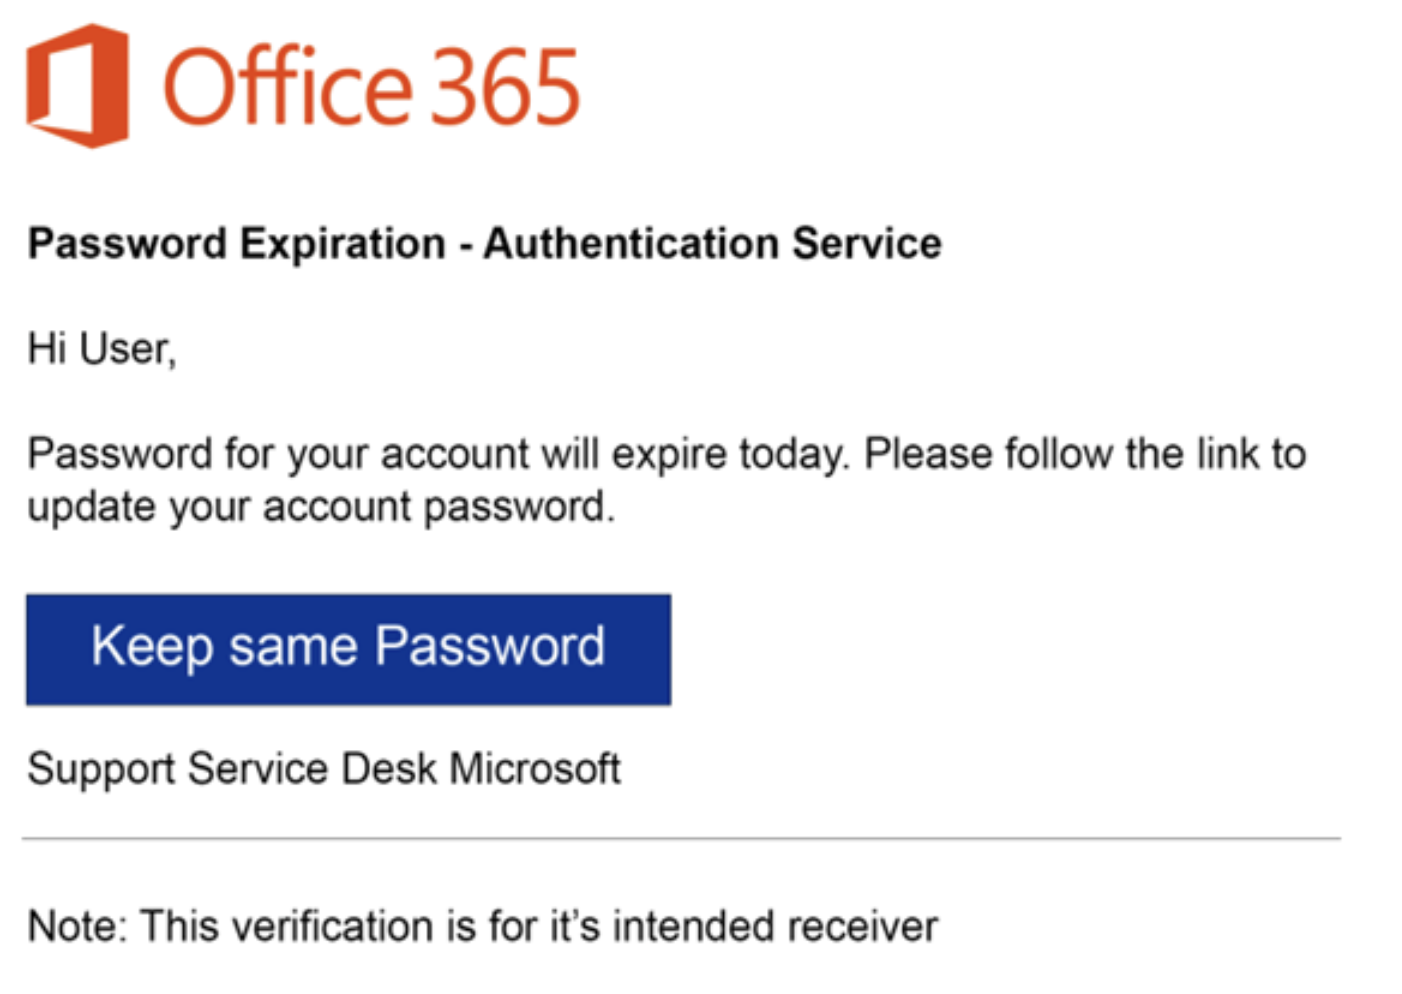 A fake Office 365-branded notification with the heading "Password Expiration - Authentication Service" and a "Keep same Password" button.